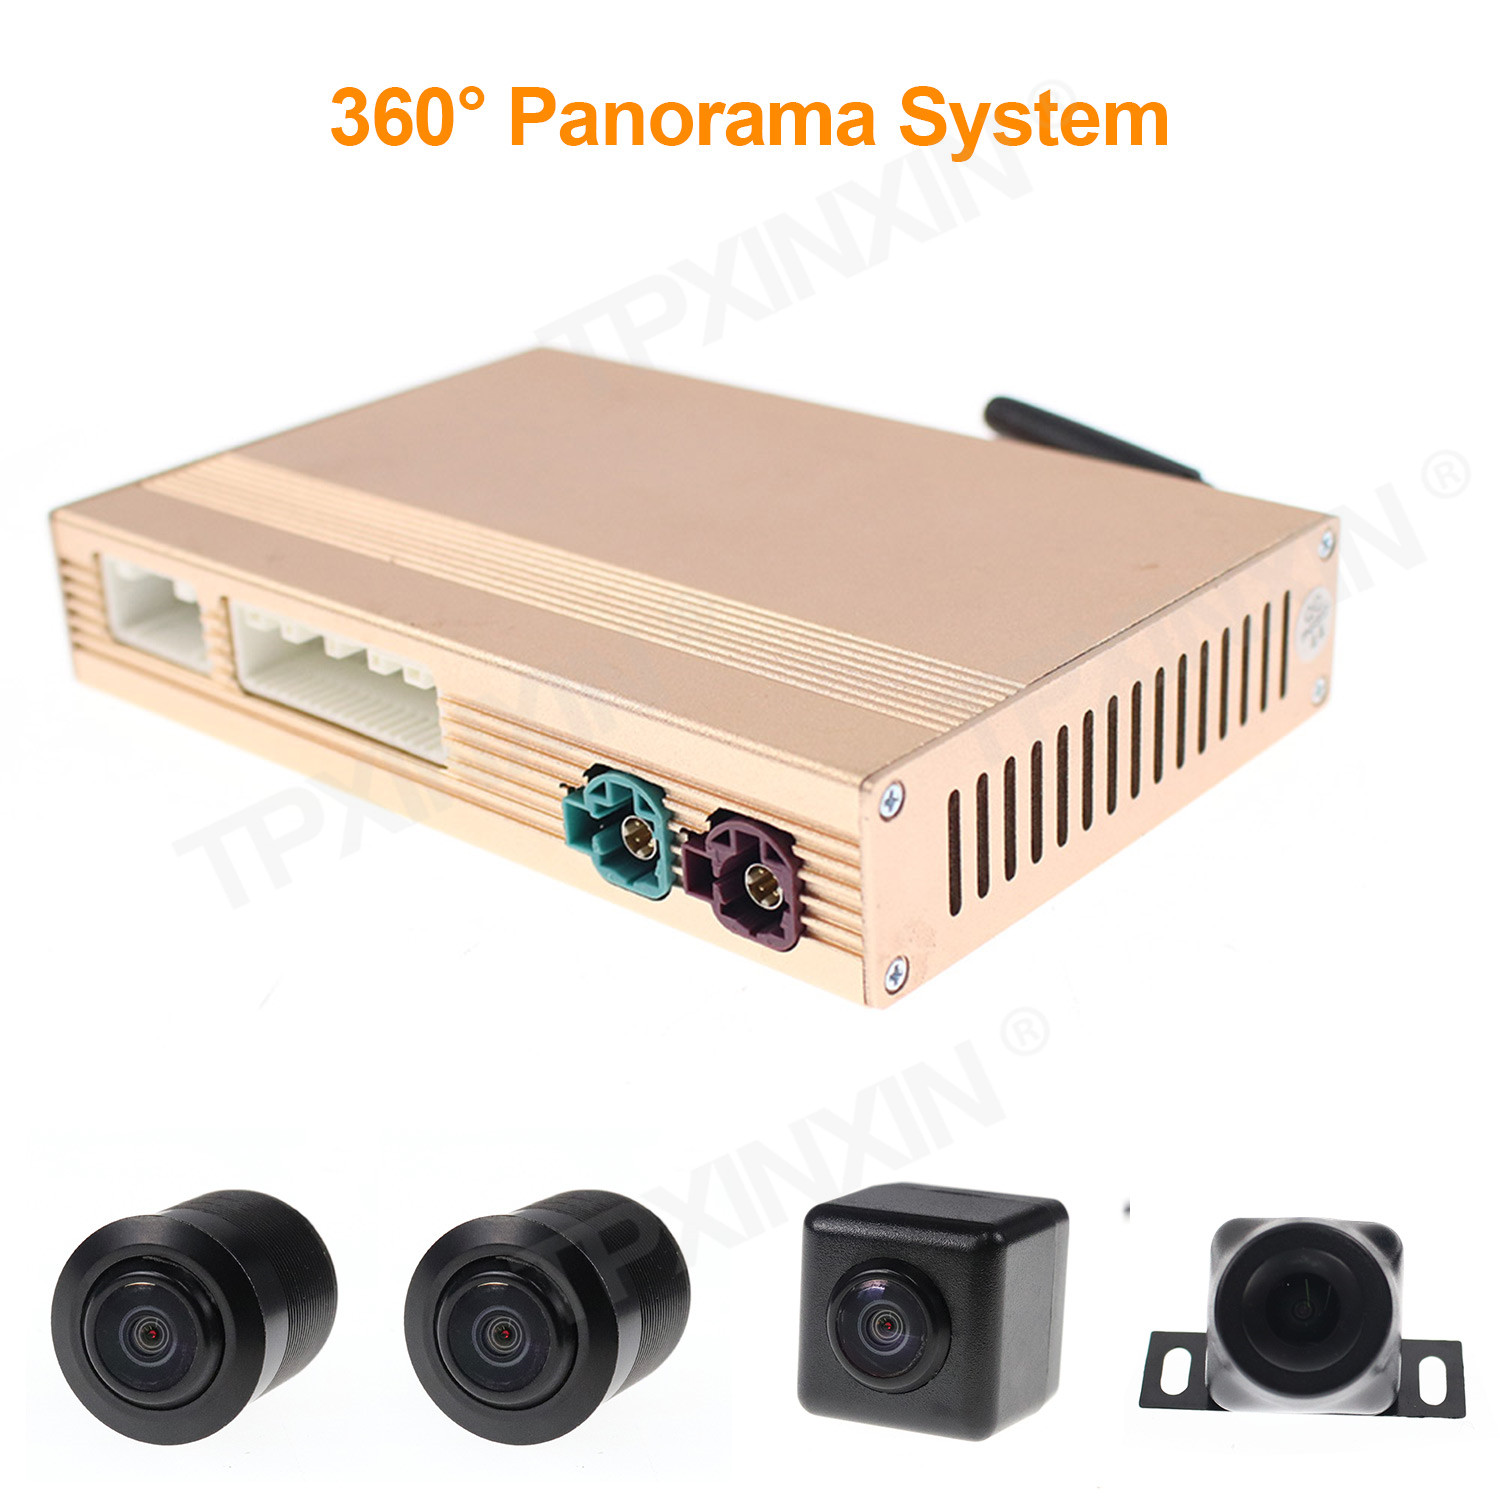 DVR HD 360 Surround View System Driving With Bird View Panorama System 4 Car Camera 3D 1080P DVR G-Sensor Car Auto stereo 